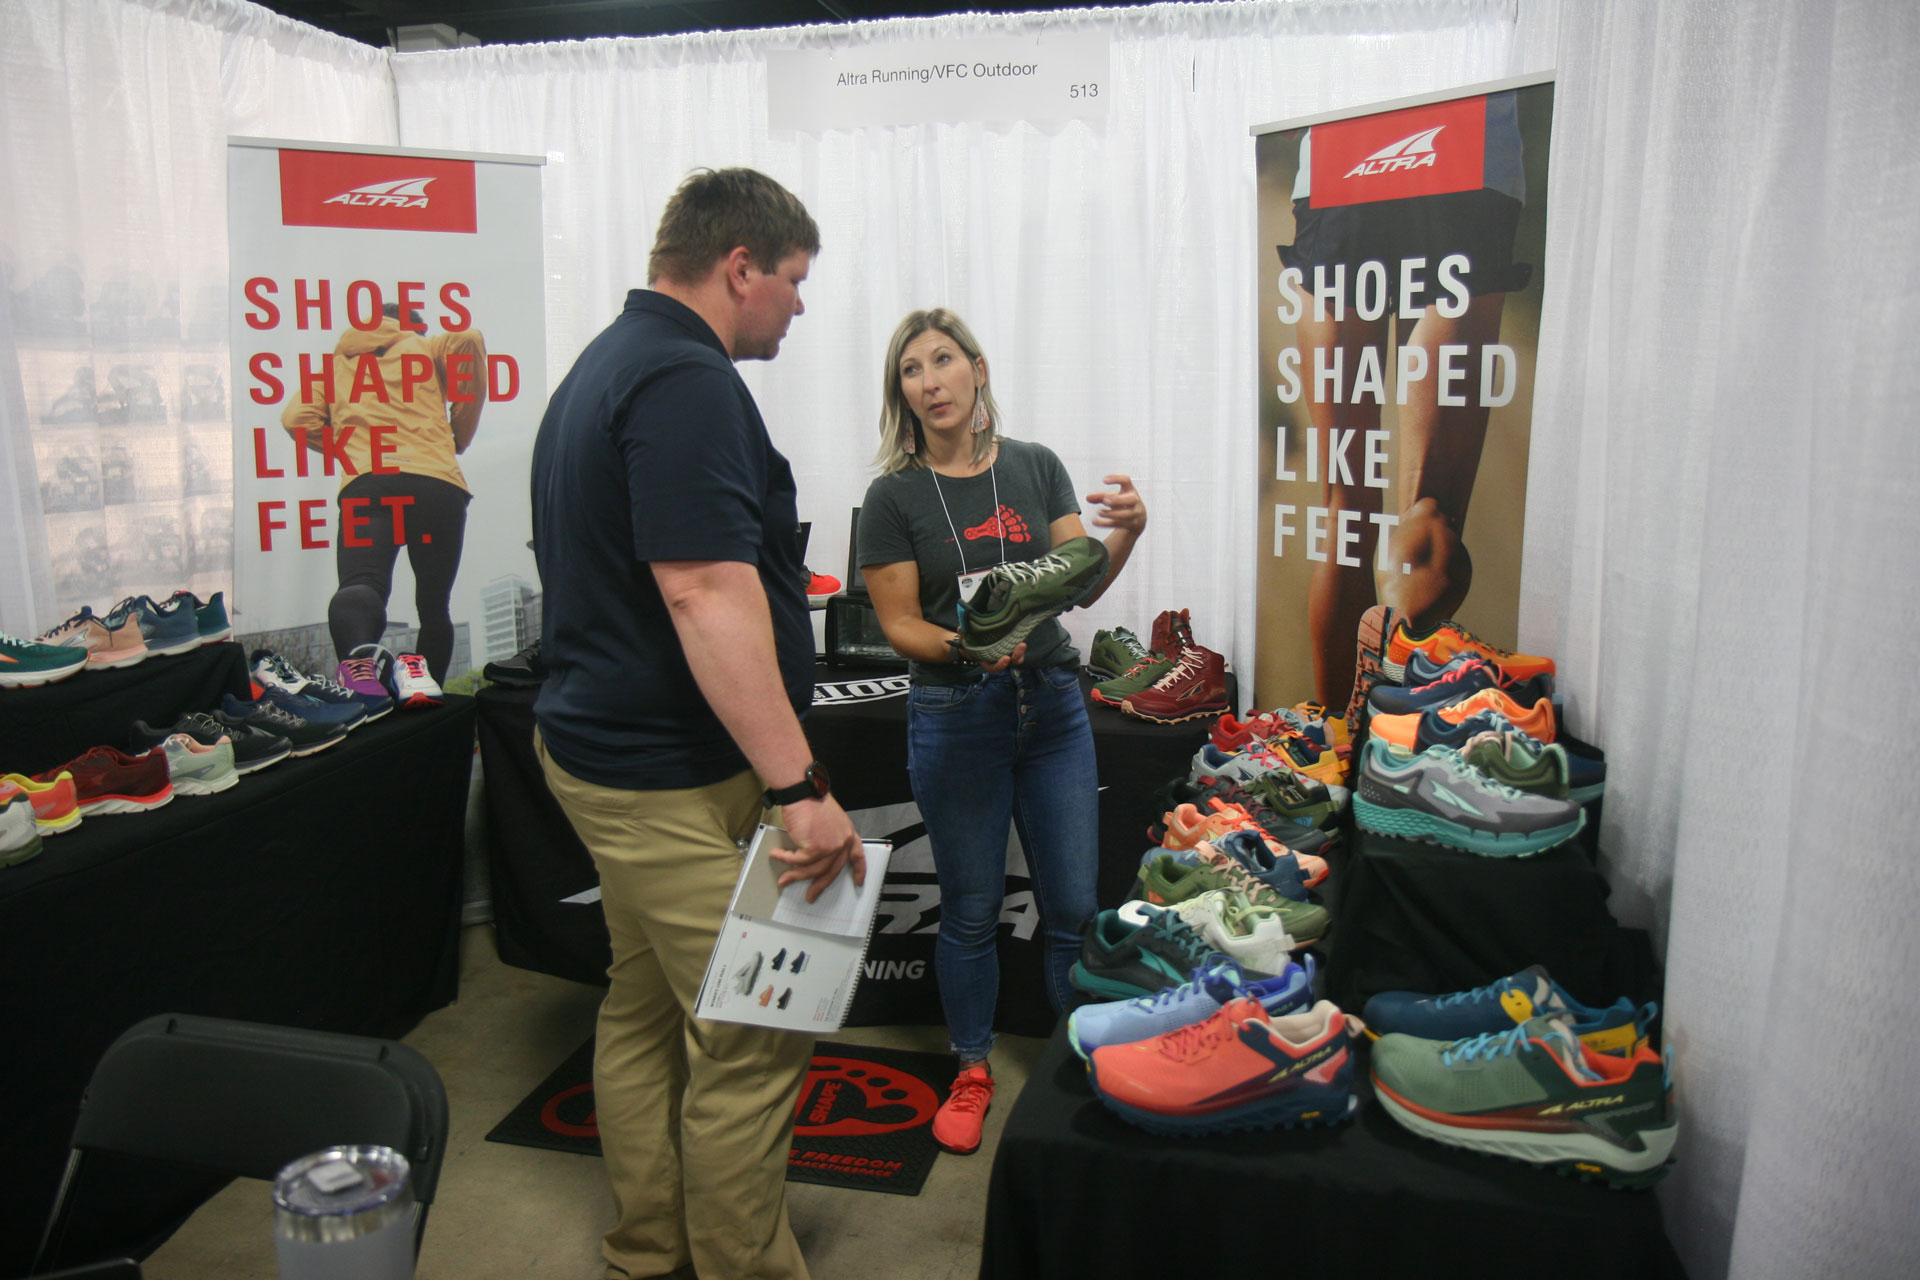 Person showing Altra brand shoes at an exhibit booth